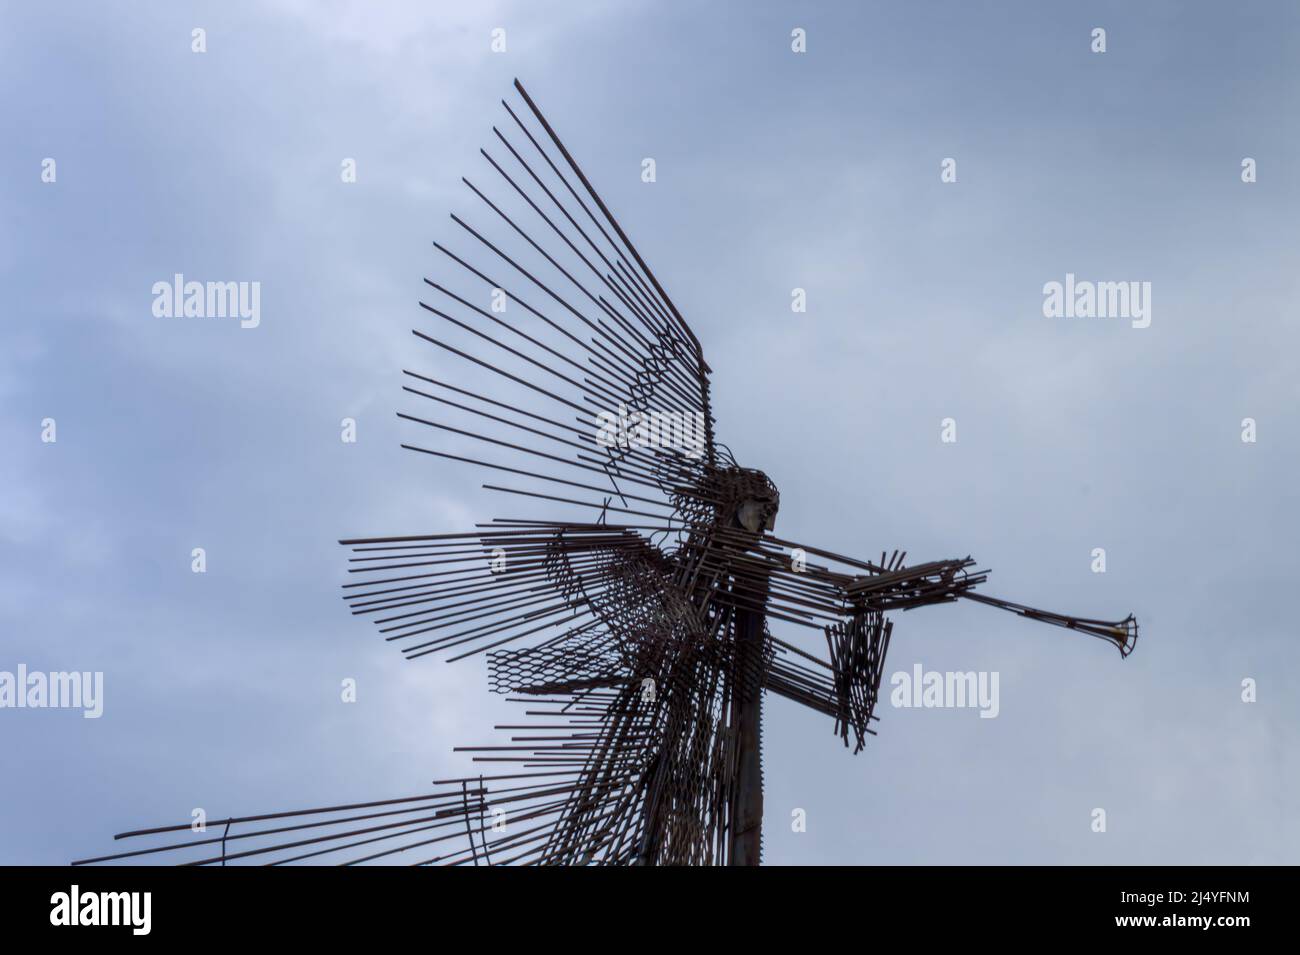 Chernobyl, Ukraine, May 11, 2019. Metal sculpture of a trumpeting angel against the blue sky in Chernobyl. Monument to the Chernobyl nuclear disaster. Stock Photo